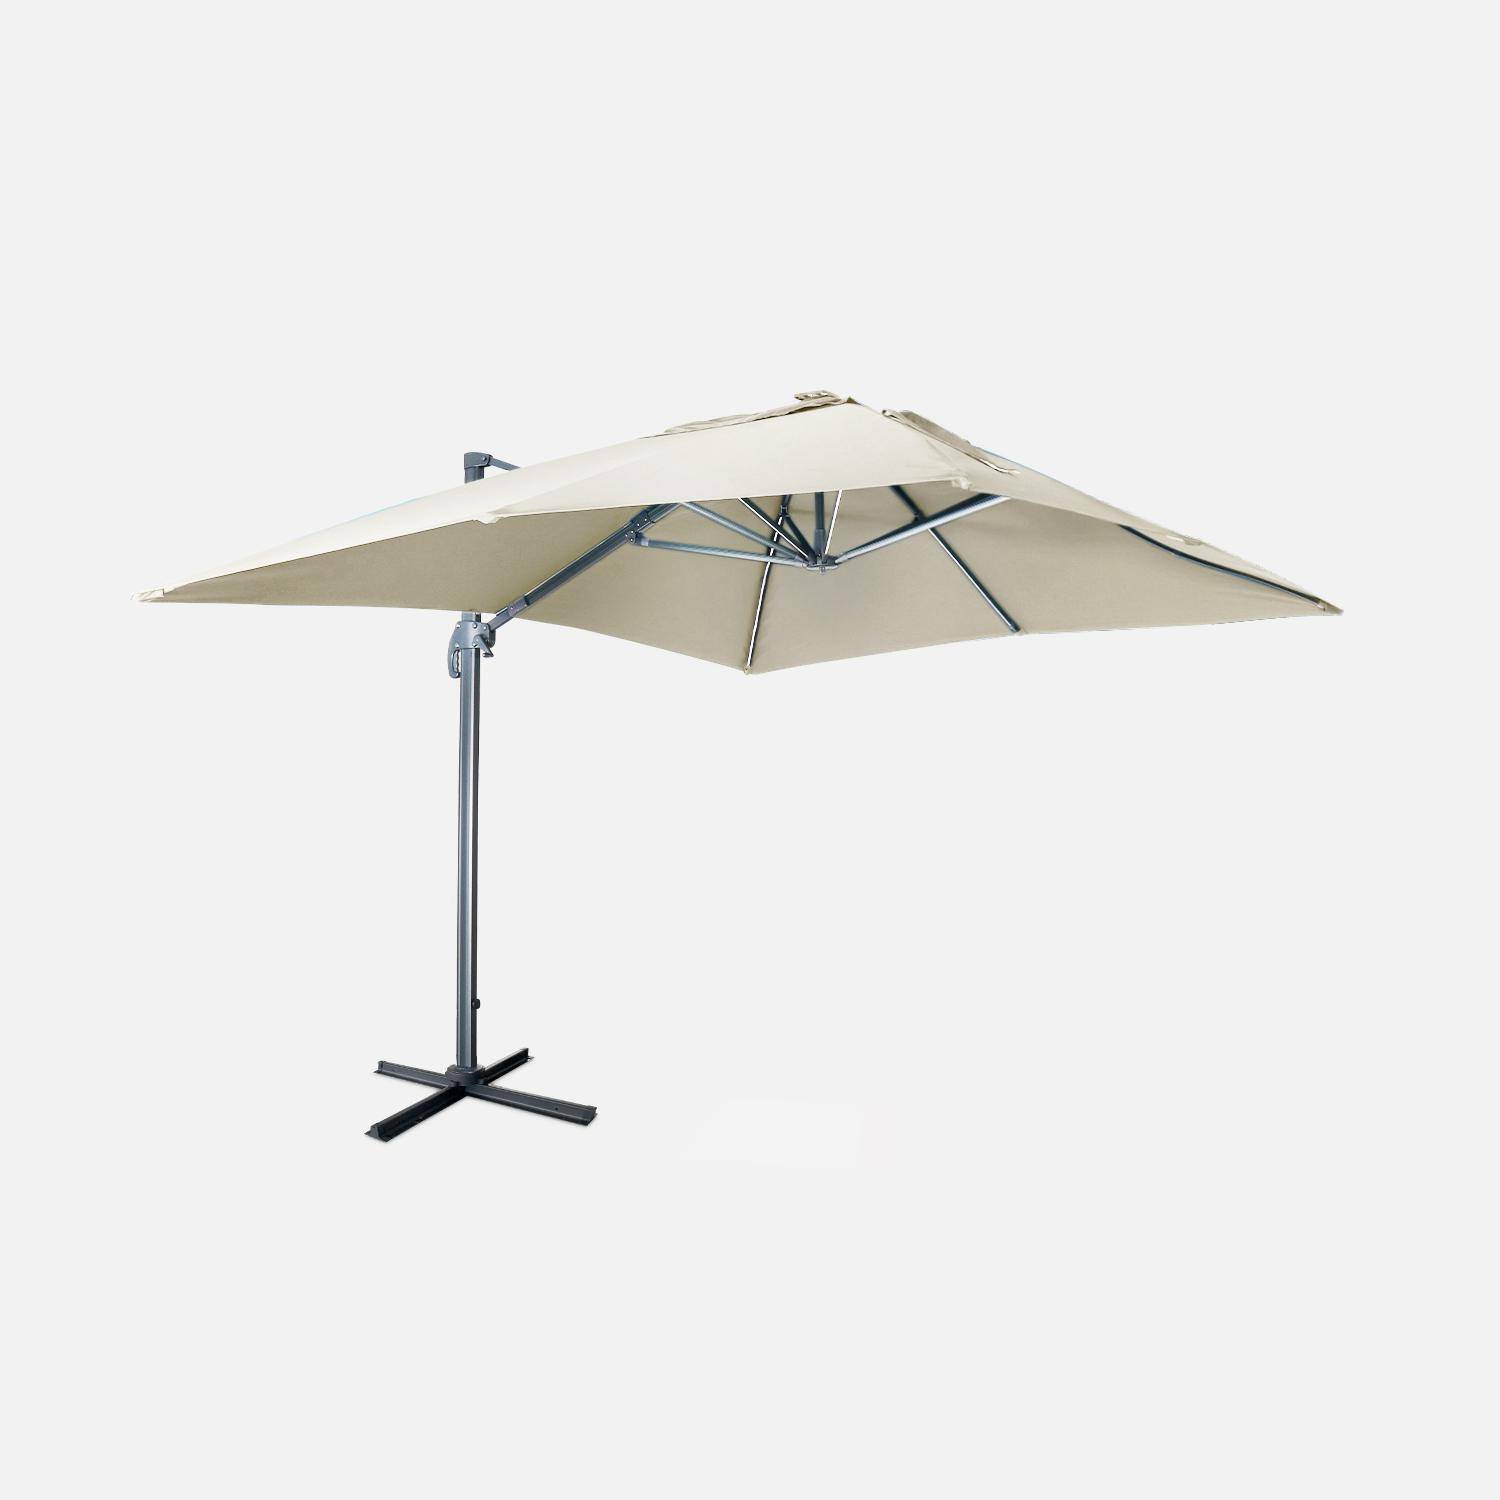 Premium quality rectangular 3x4m cantilever parasol with solar-powered integrated LED lights - Cantilever parasol, tiltable, foldable with 360° rotation, solar charging, cover included - Luce - Beige Photo1